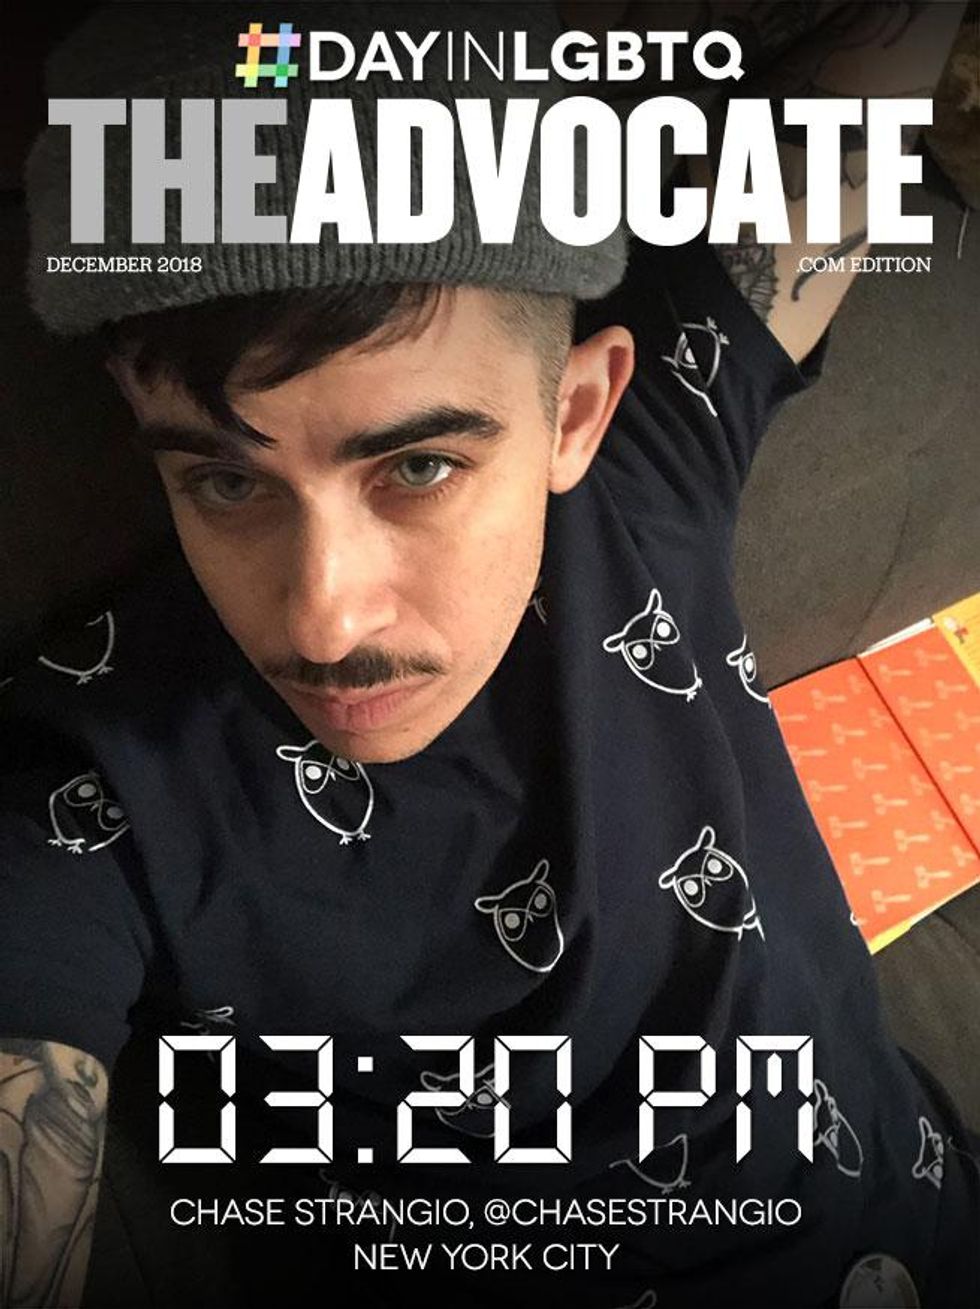 Pm-03-20-chase-theadvocate-2018-dayinlgbt-cover-template-655